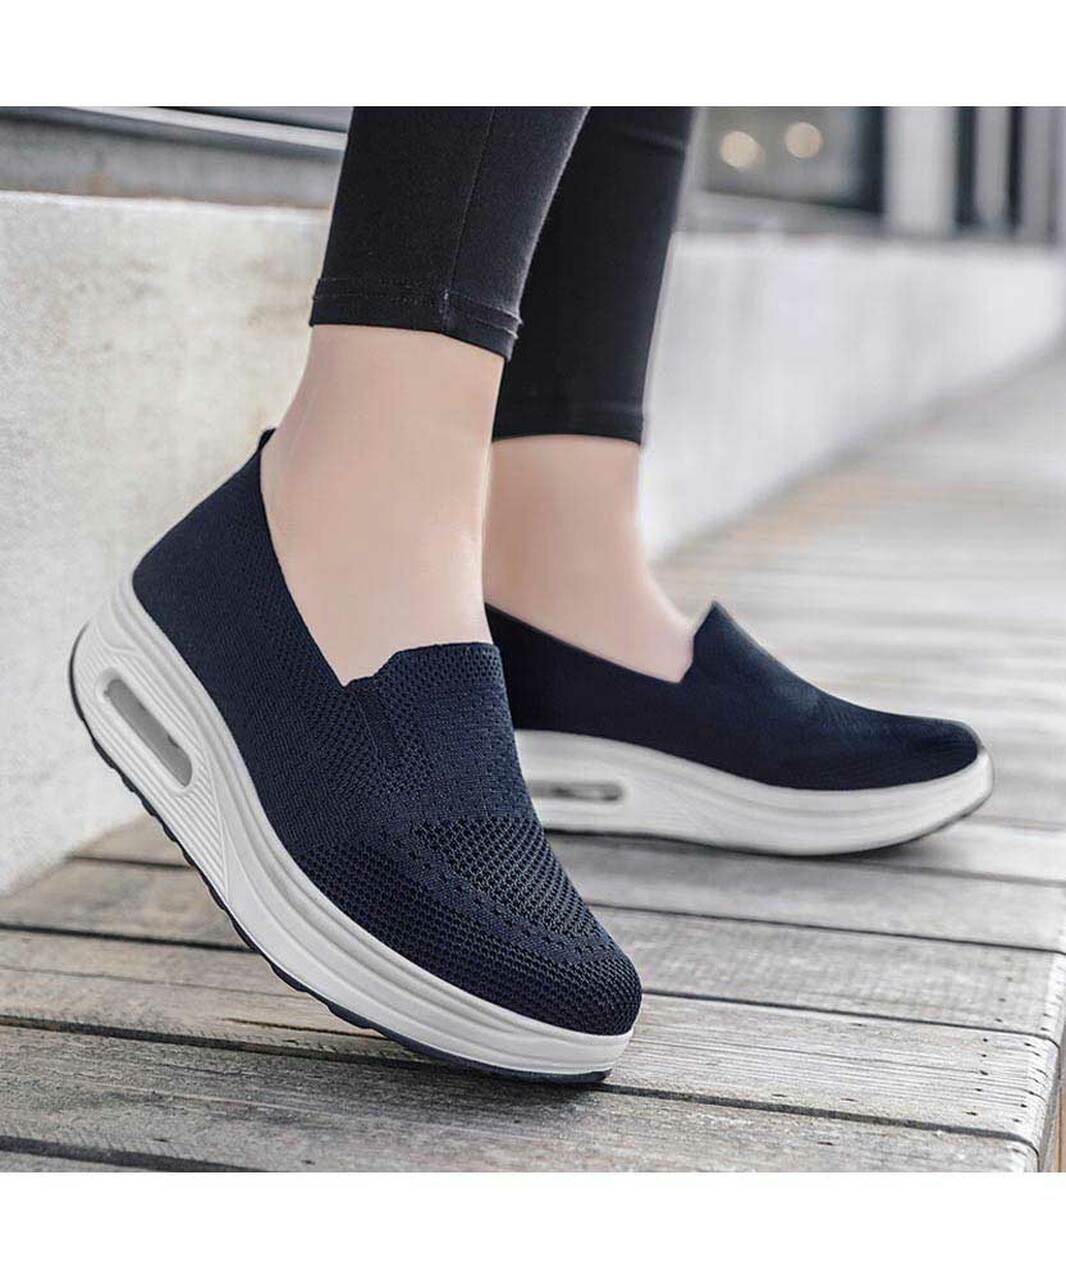 WOMEN'S ORTHOPEDIC ARCH-SUPPORT SNEAKERS 2023 – 🇨🇦 BEST FOOTWEAR CANADA 🇨🇦